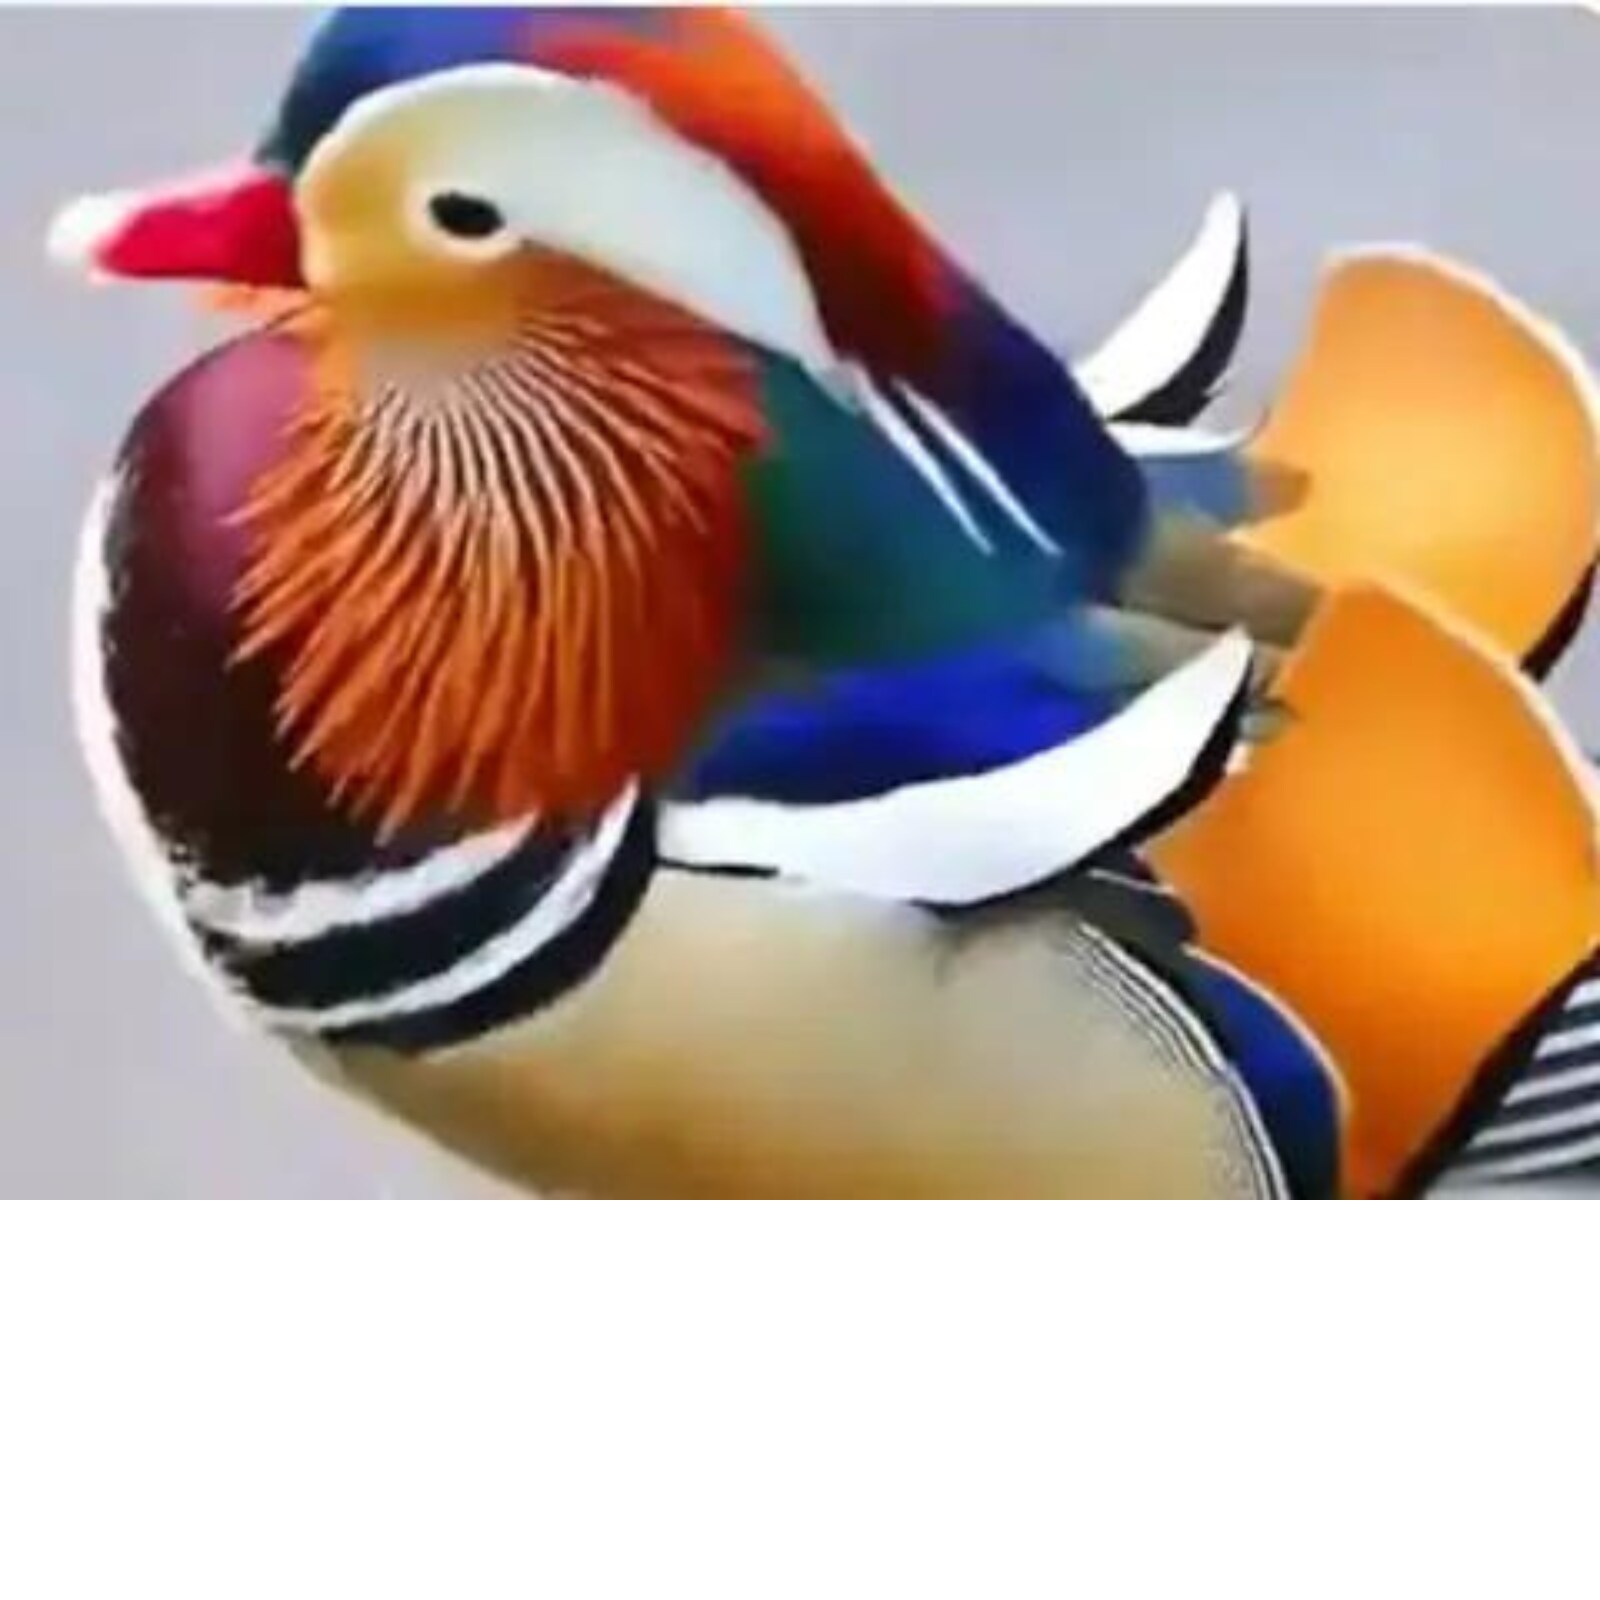 mandarin duck for sale in india